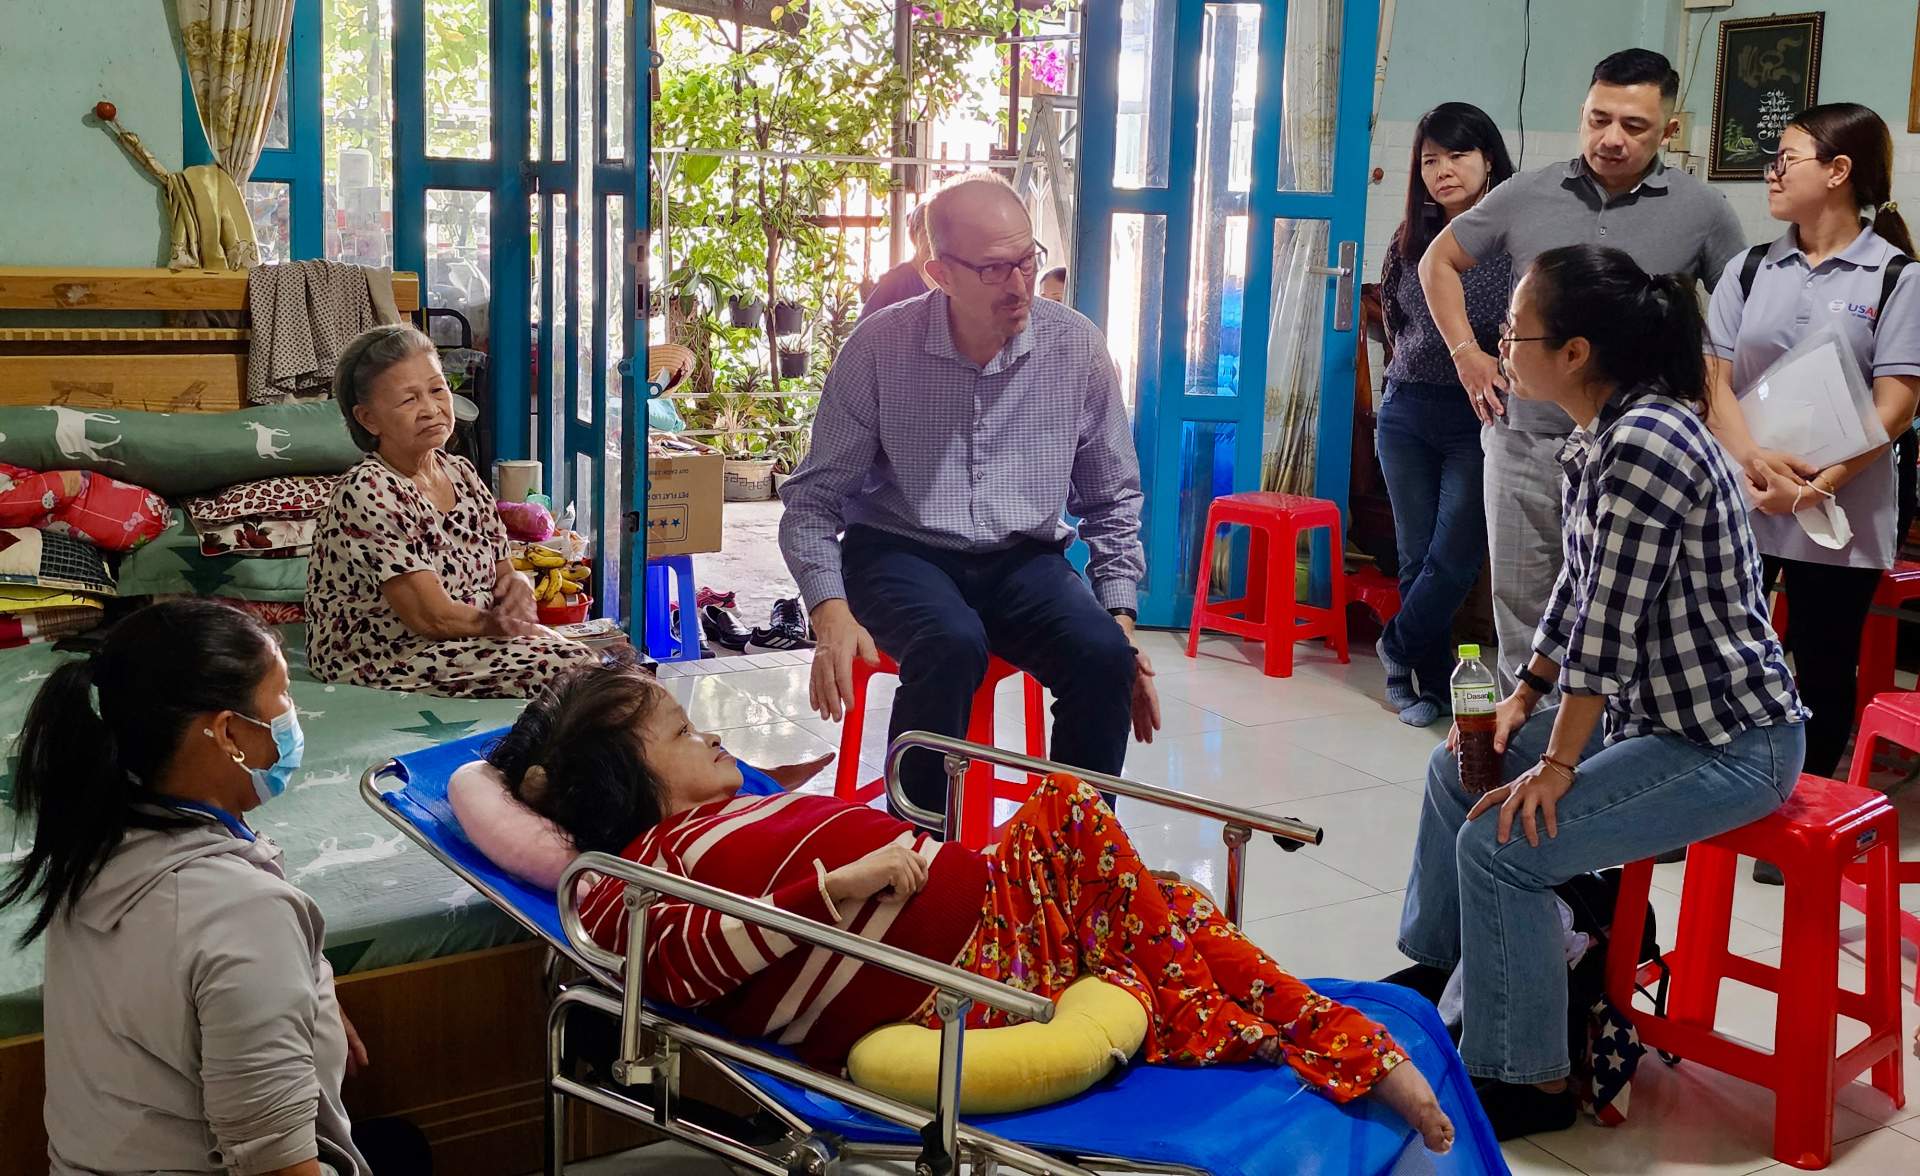 Mr. Anthony Kolb, Director Office of Environmental and Social Development and Ms. Le Nguyen of USAID/Vietnam visit a physical therapy club for children with disabilities in Đình Quân District, Dong Nai Province.